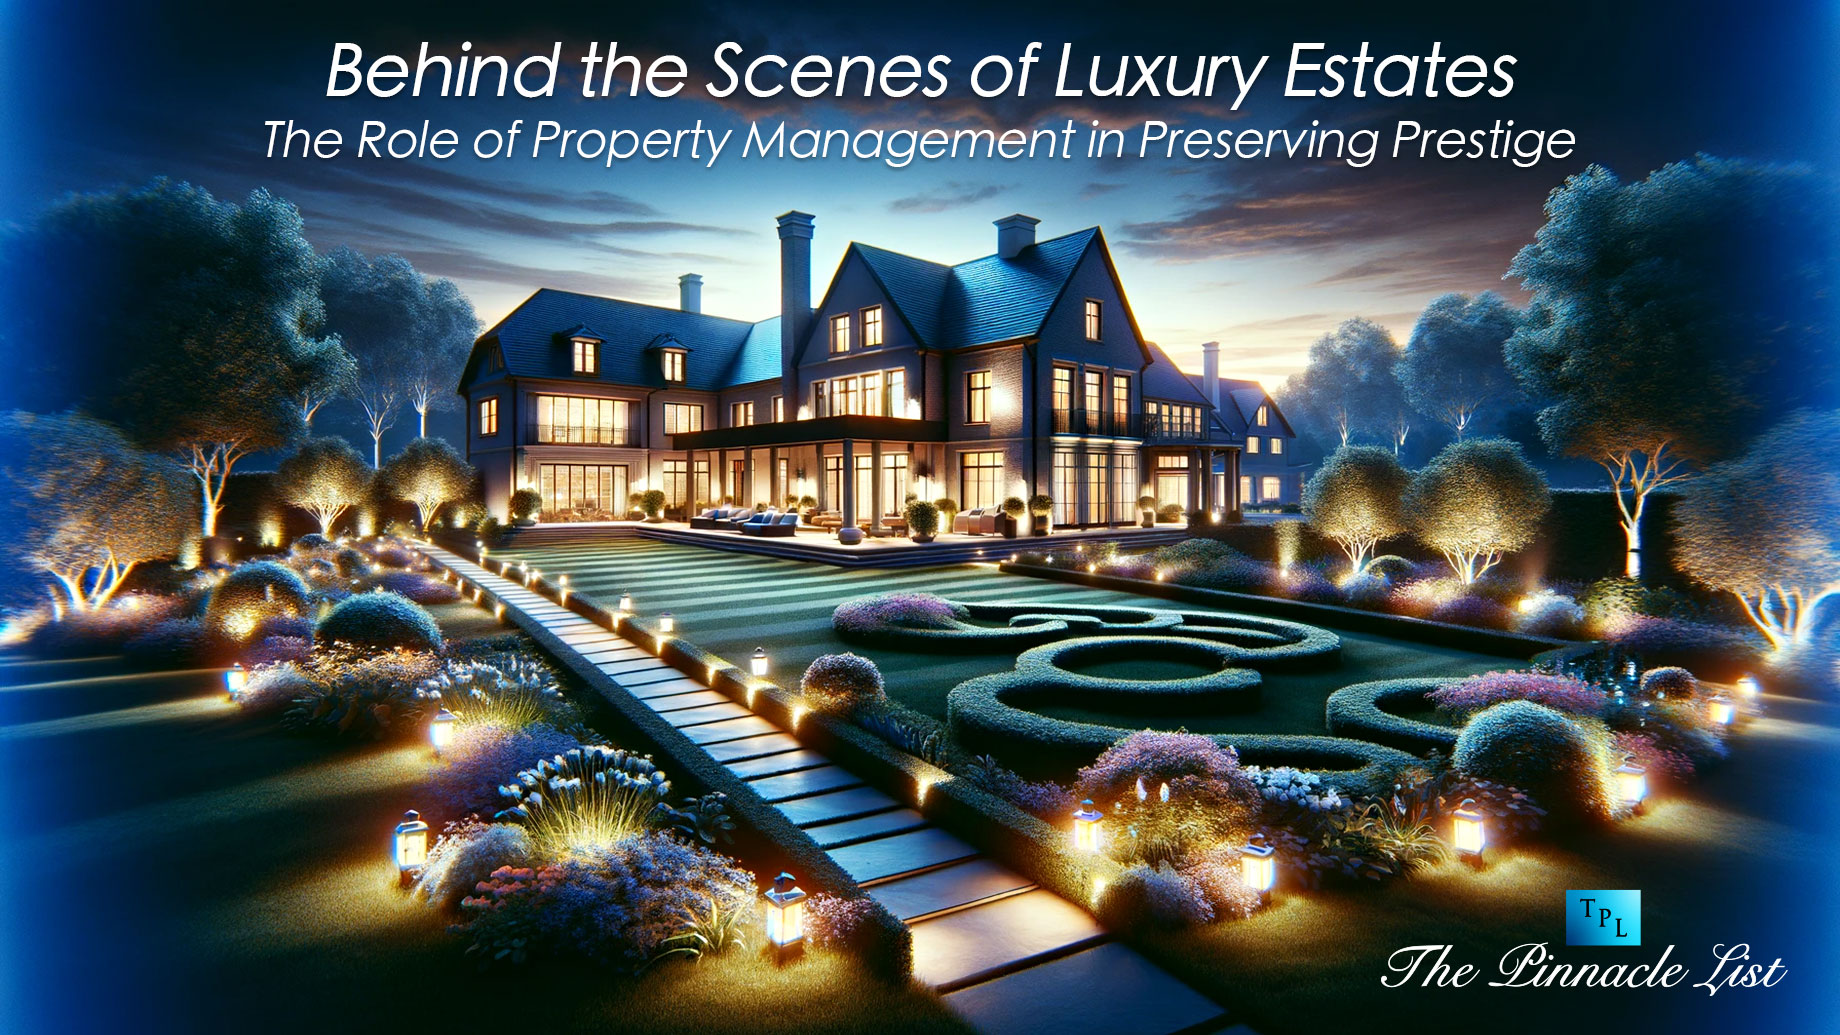 Behind the Scenes of Luxury Estates: The Role of Property Management in Preserving Prestige